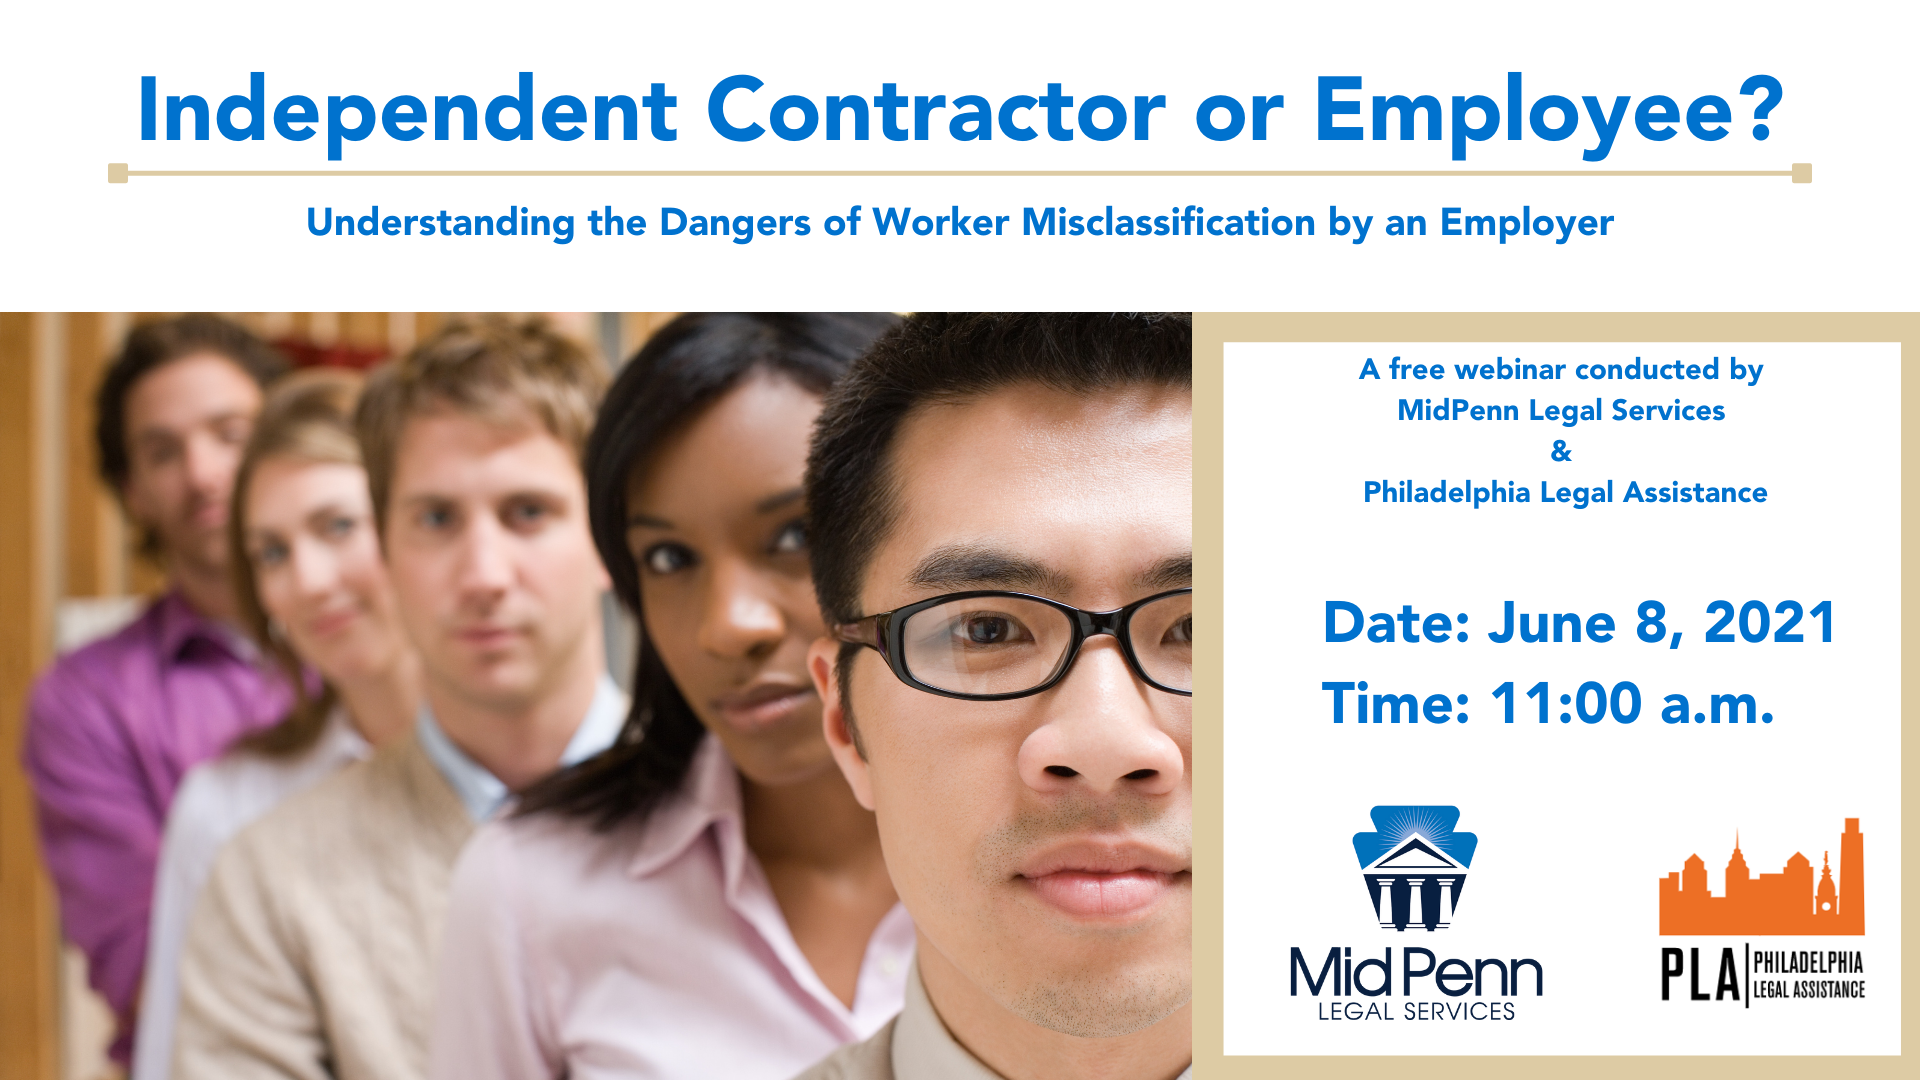 Independent Contractor or Employee